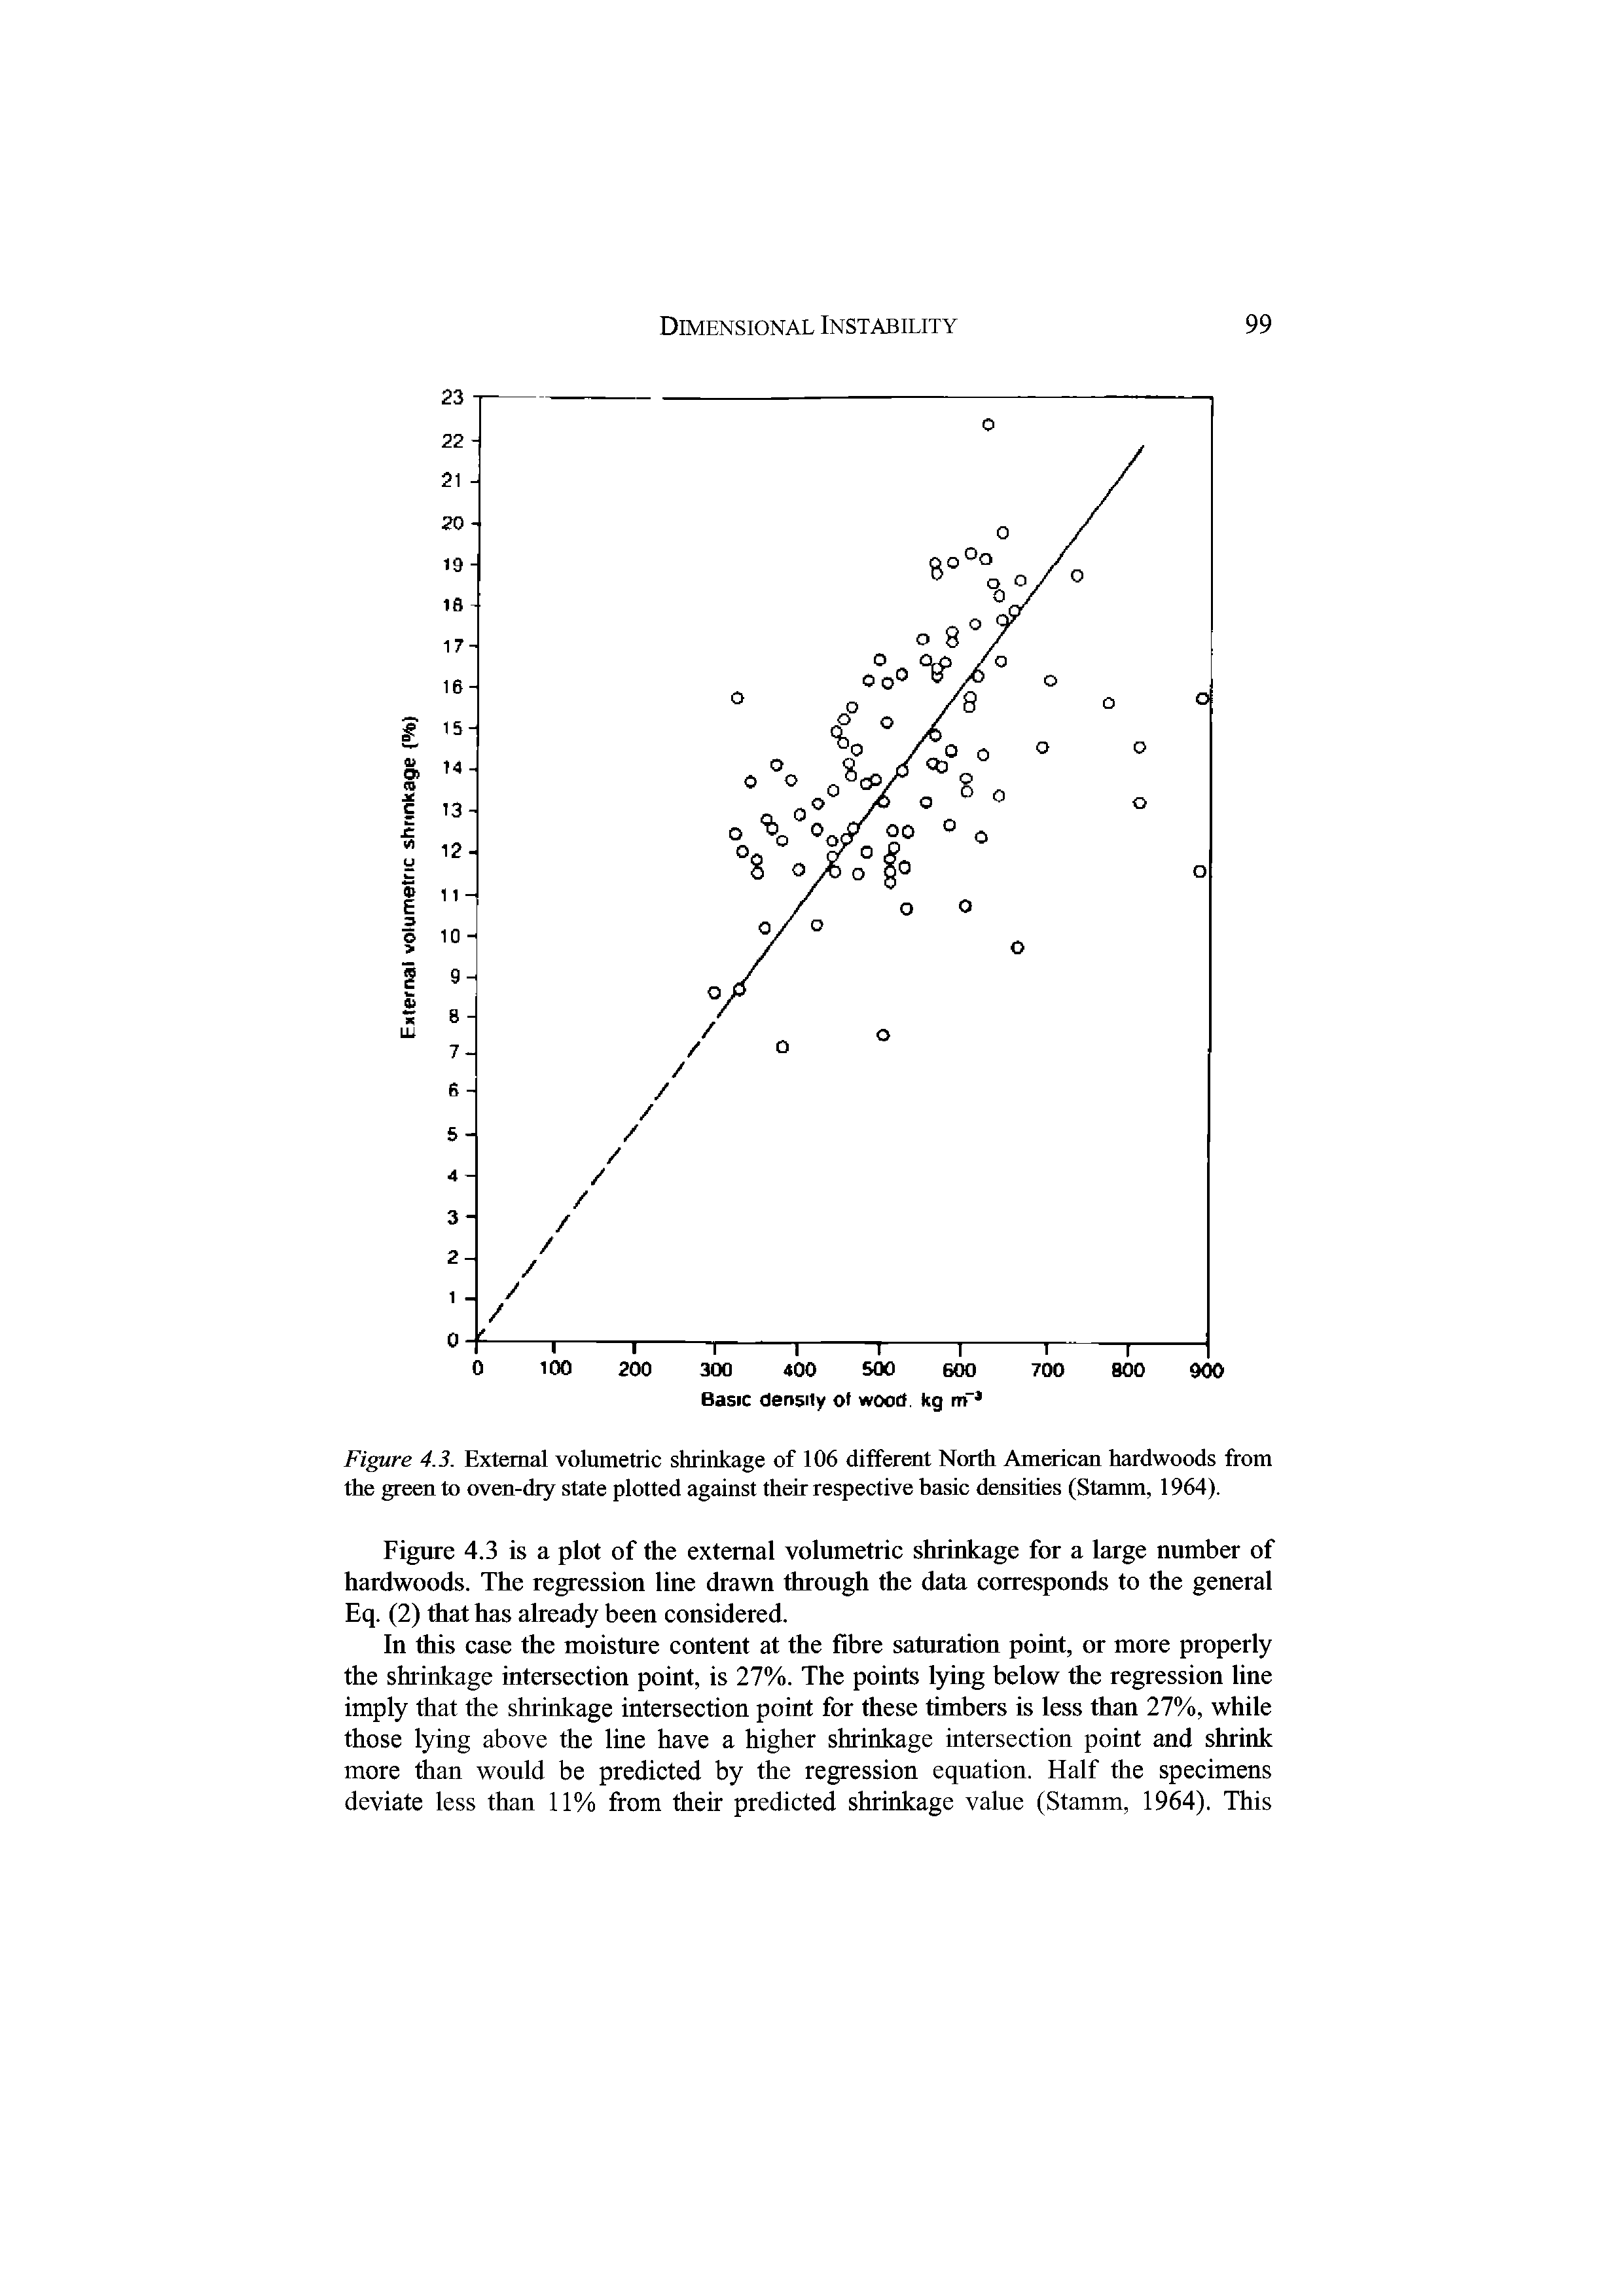 Figure 4.3. External volumetric shrinkage of 106 different North American hardwoods from the green to oven-dry state plotted against their respective basic densities (Stamm, 1964).